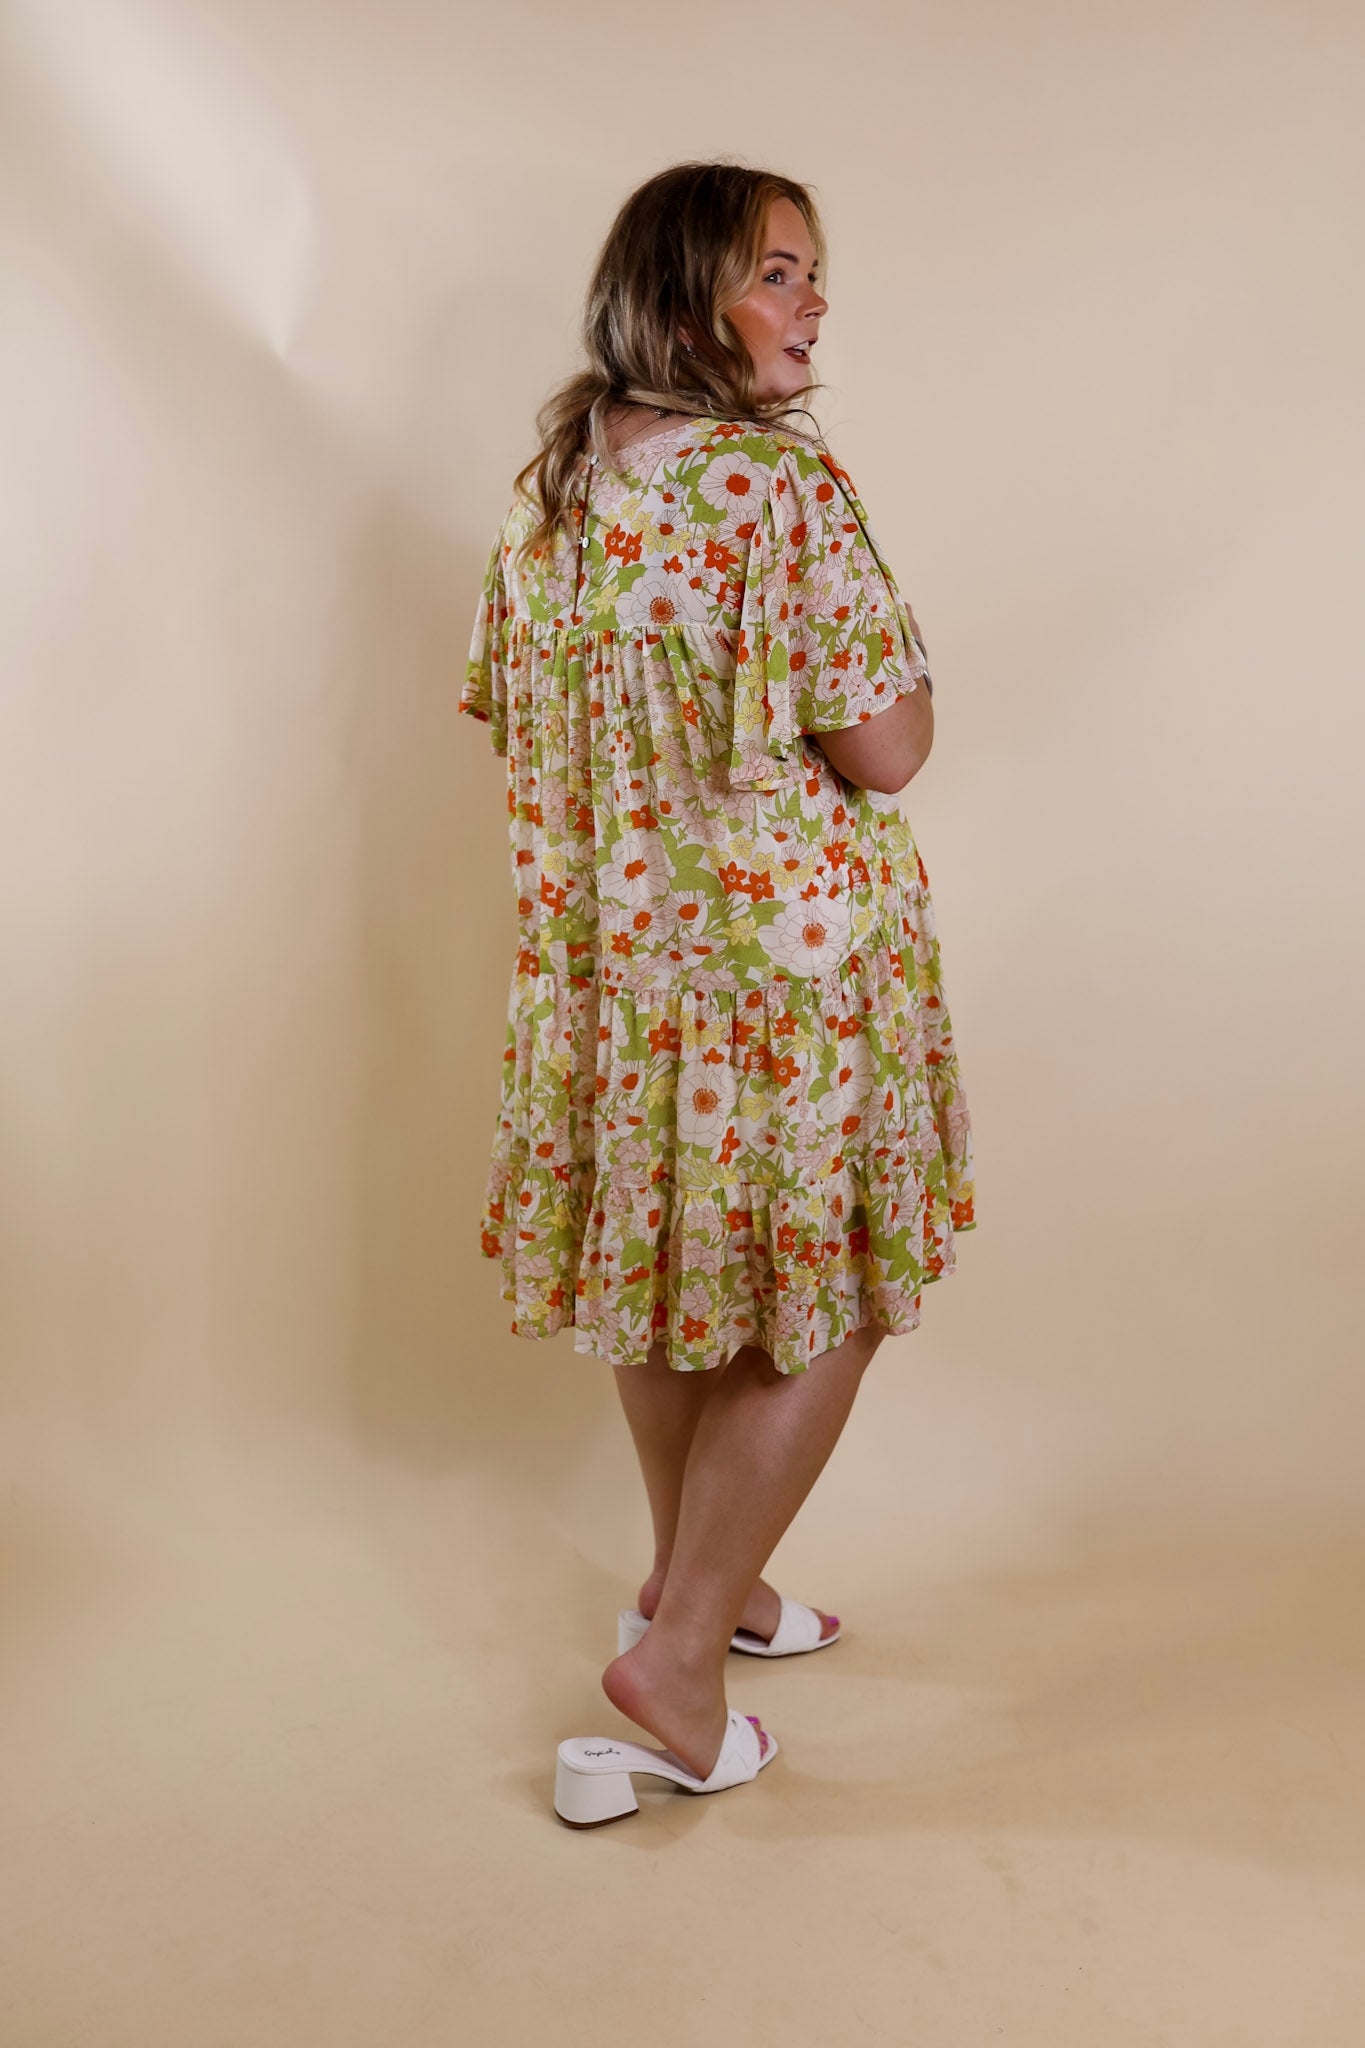 State of Bliss Ruffle Tiered Floral Dress in Lime Green and Orange - Giddy Up Glamour Boutique